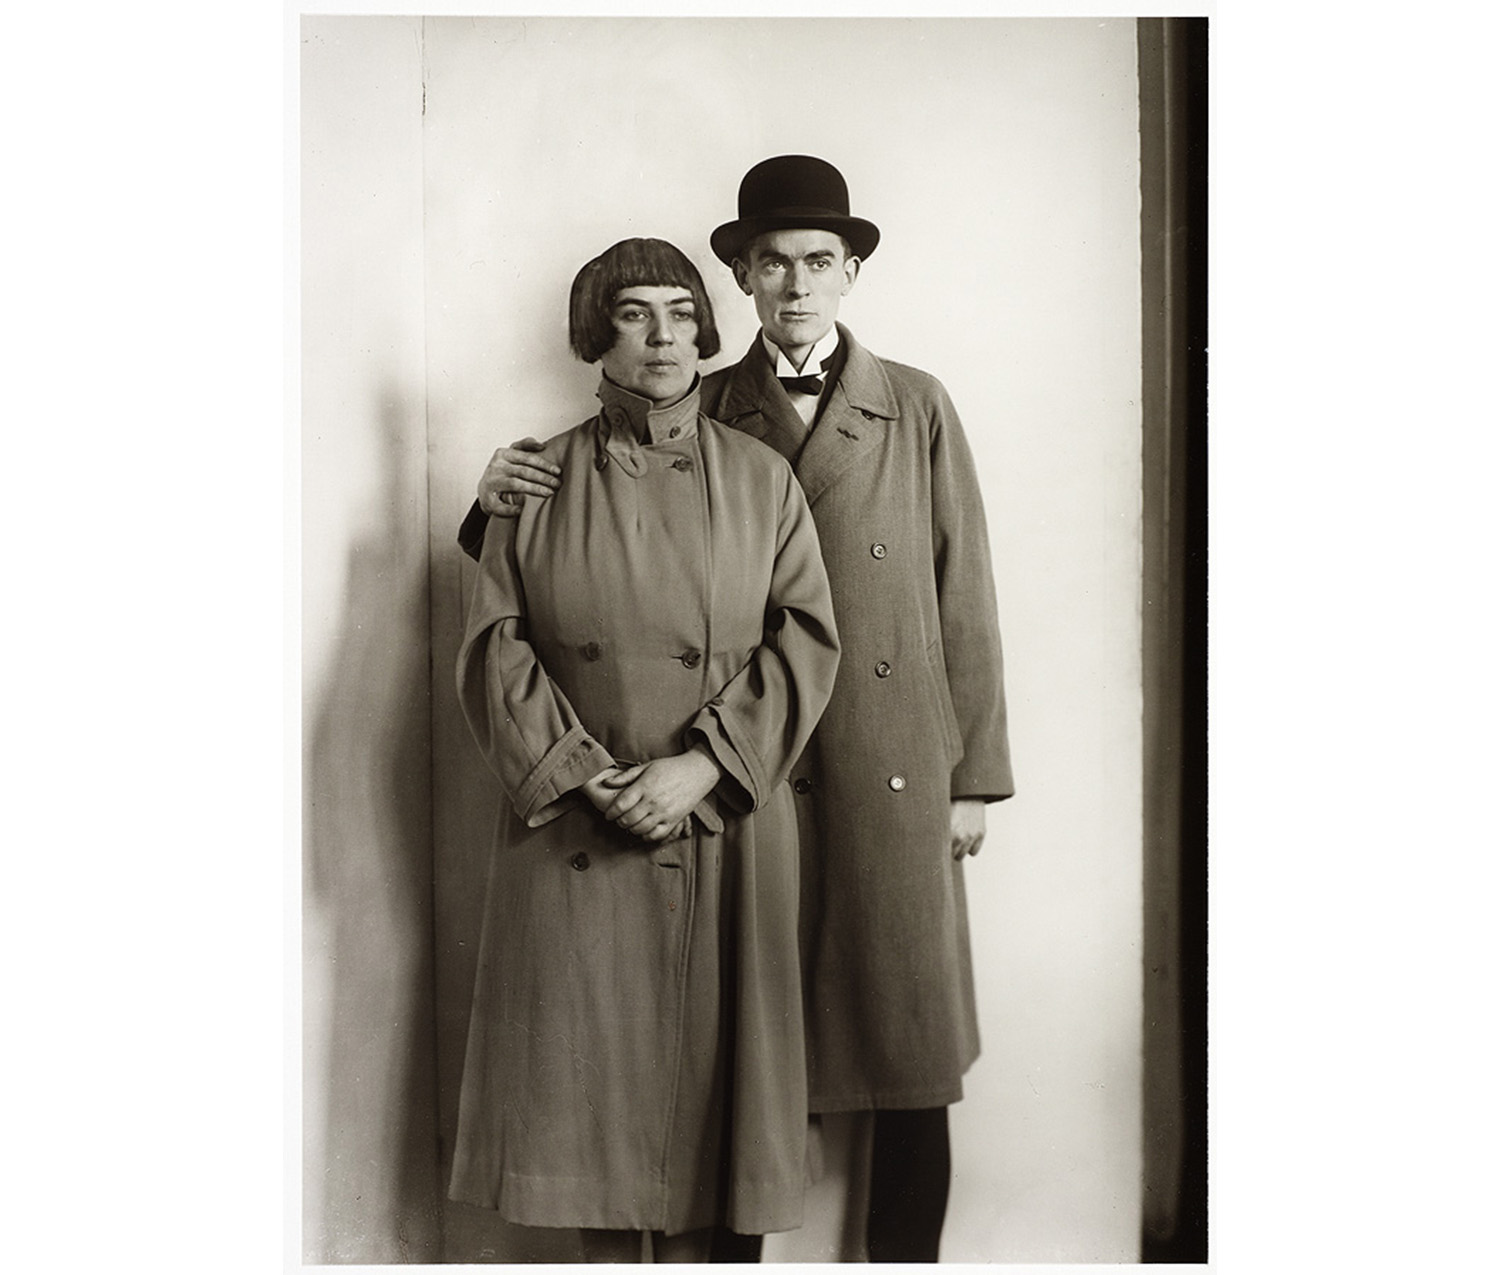 portrait of standing man and woman near a corner of a white wall; woman has cropped hair, a serious expression and wears a completely buttoned coat with the collar up, hands joined in front of her; man has a bowler hat, serious expression, proper left hand on her shoulder, wearing a buttoned overcoat, stand-up collar and black tie